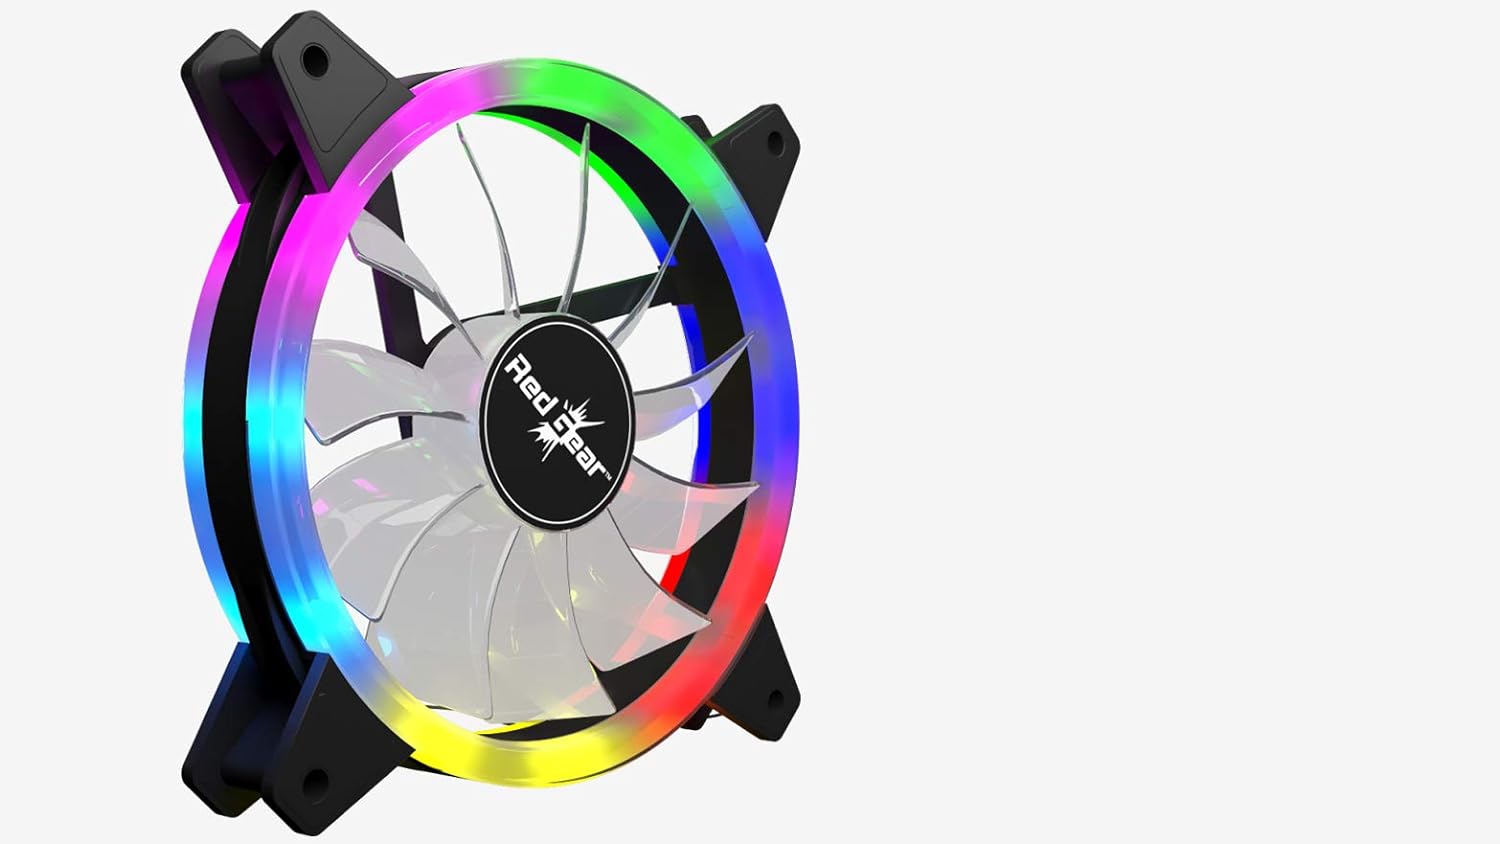 Redgear Turbo F-1 Case Cooling Fan with Auto RGB LED Light